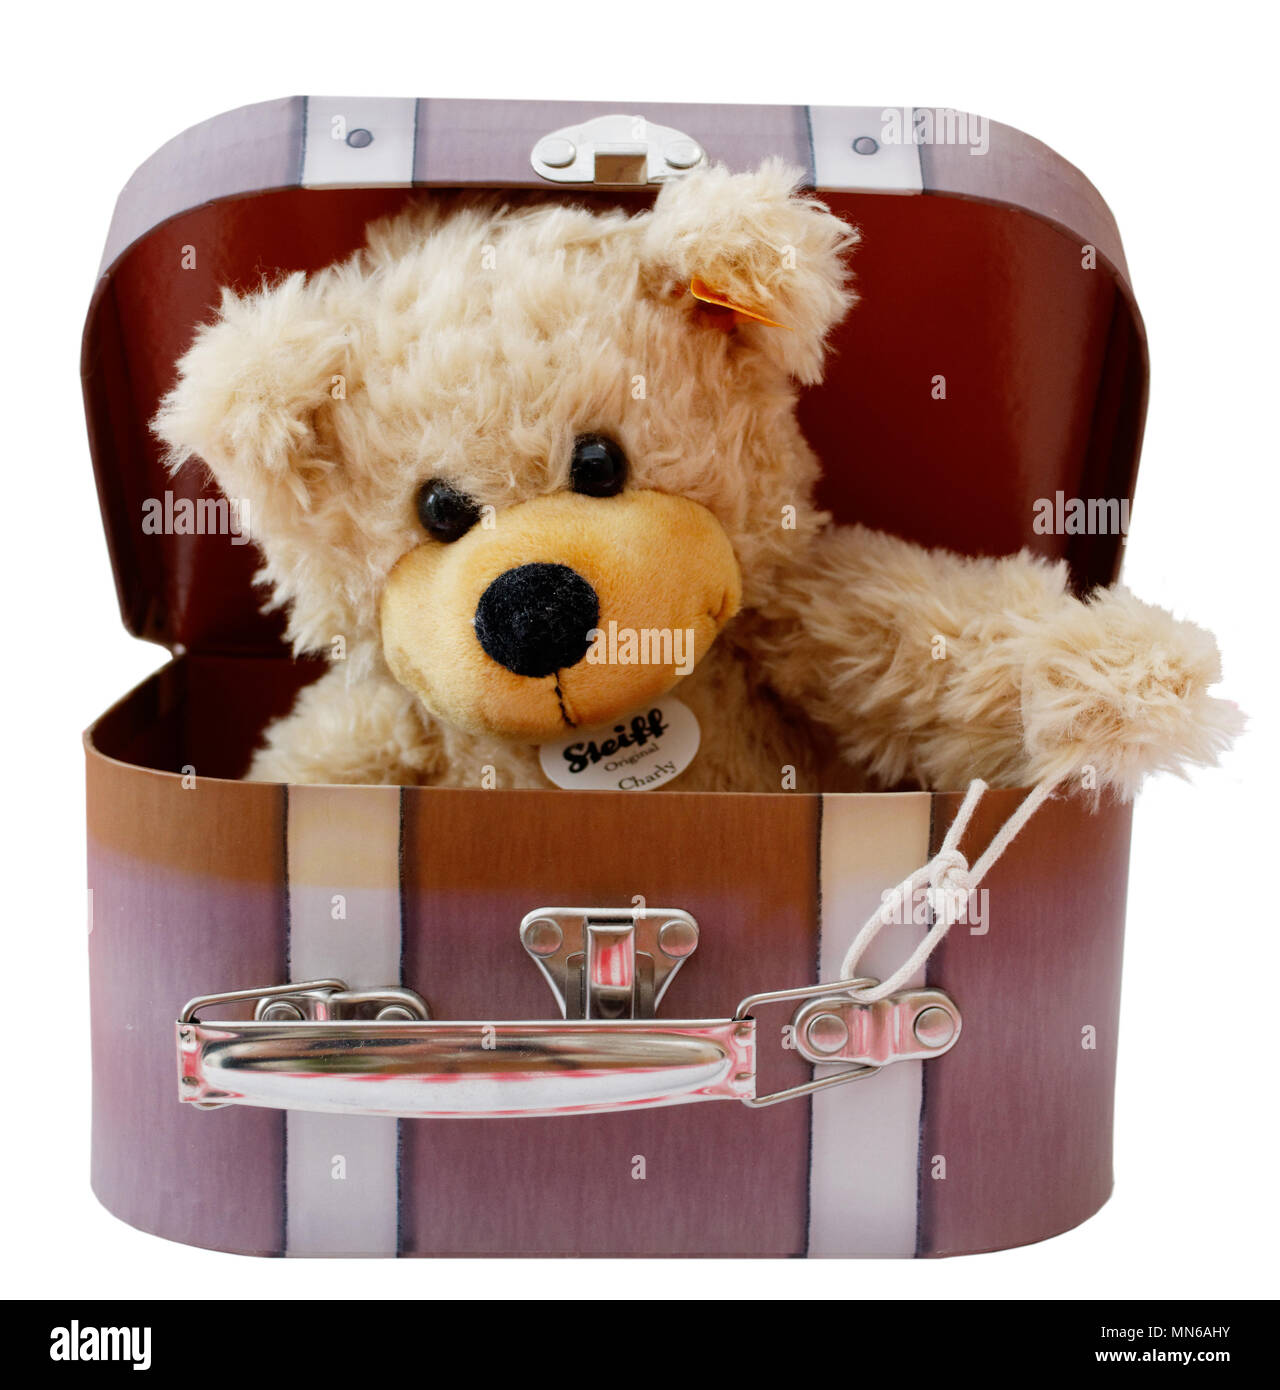 Steiff bear Charly in its travelling suitcase Stock Photo